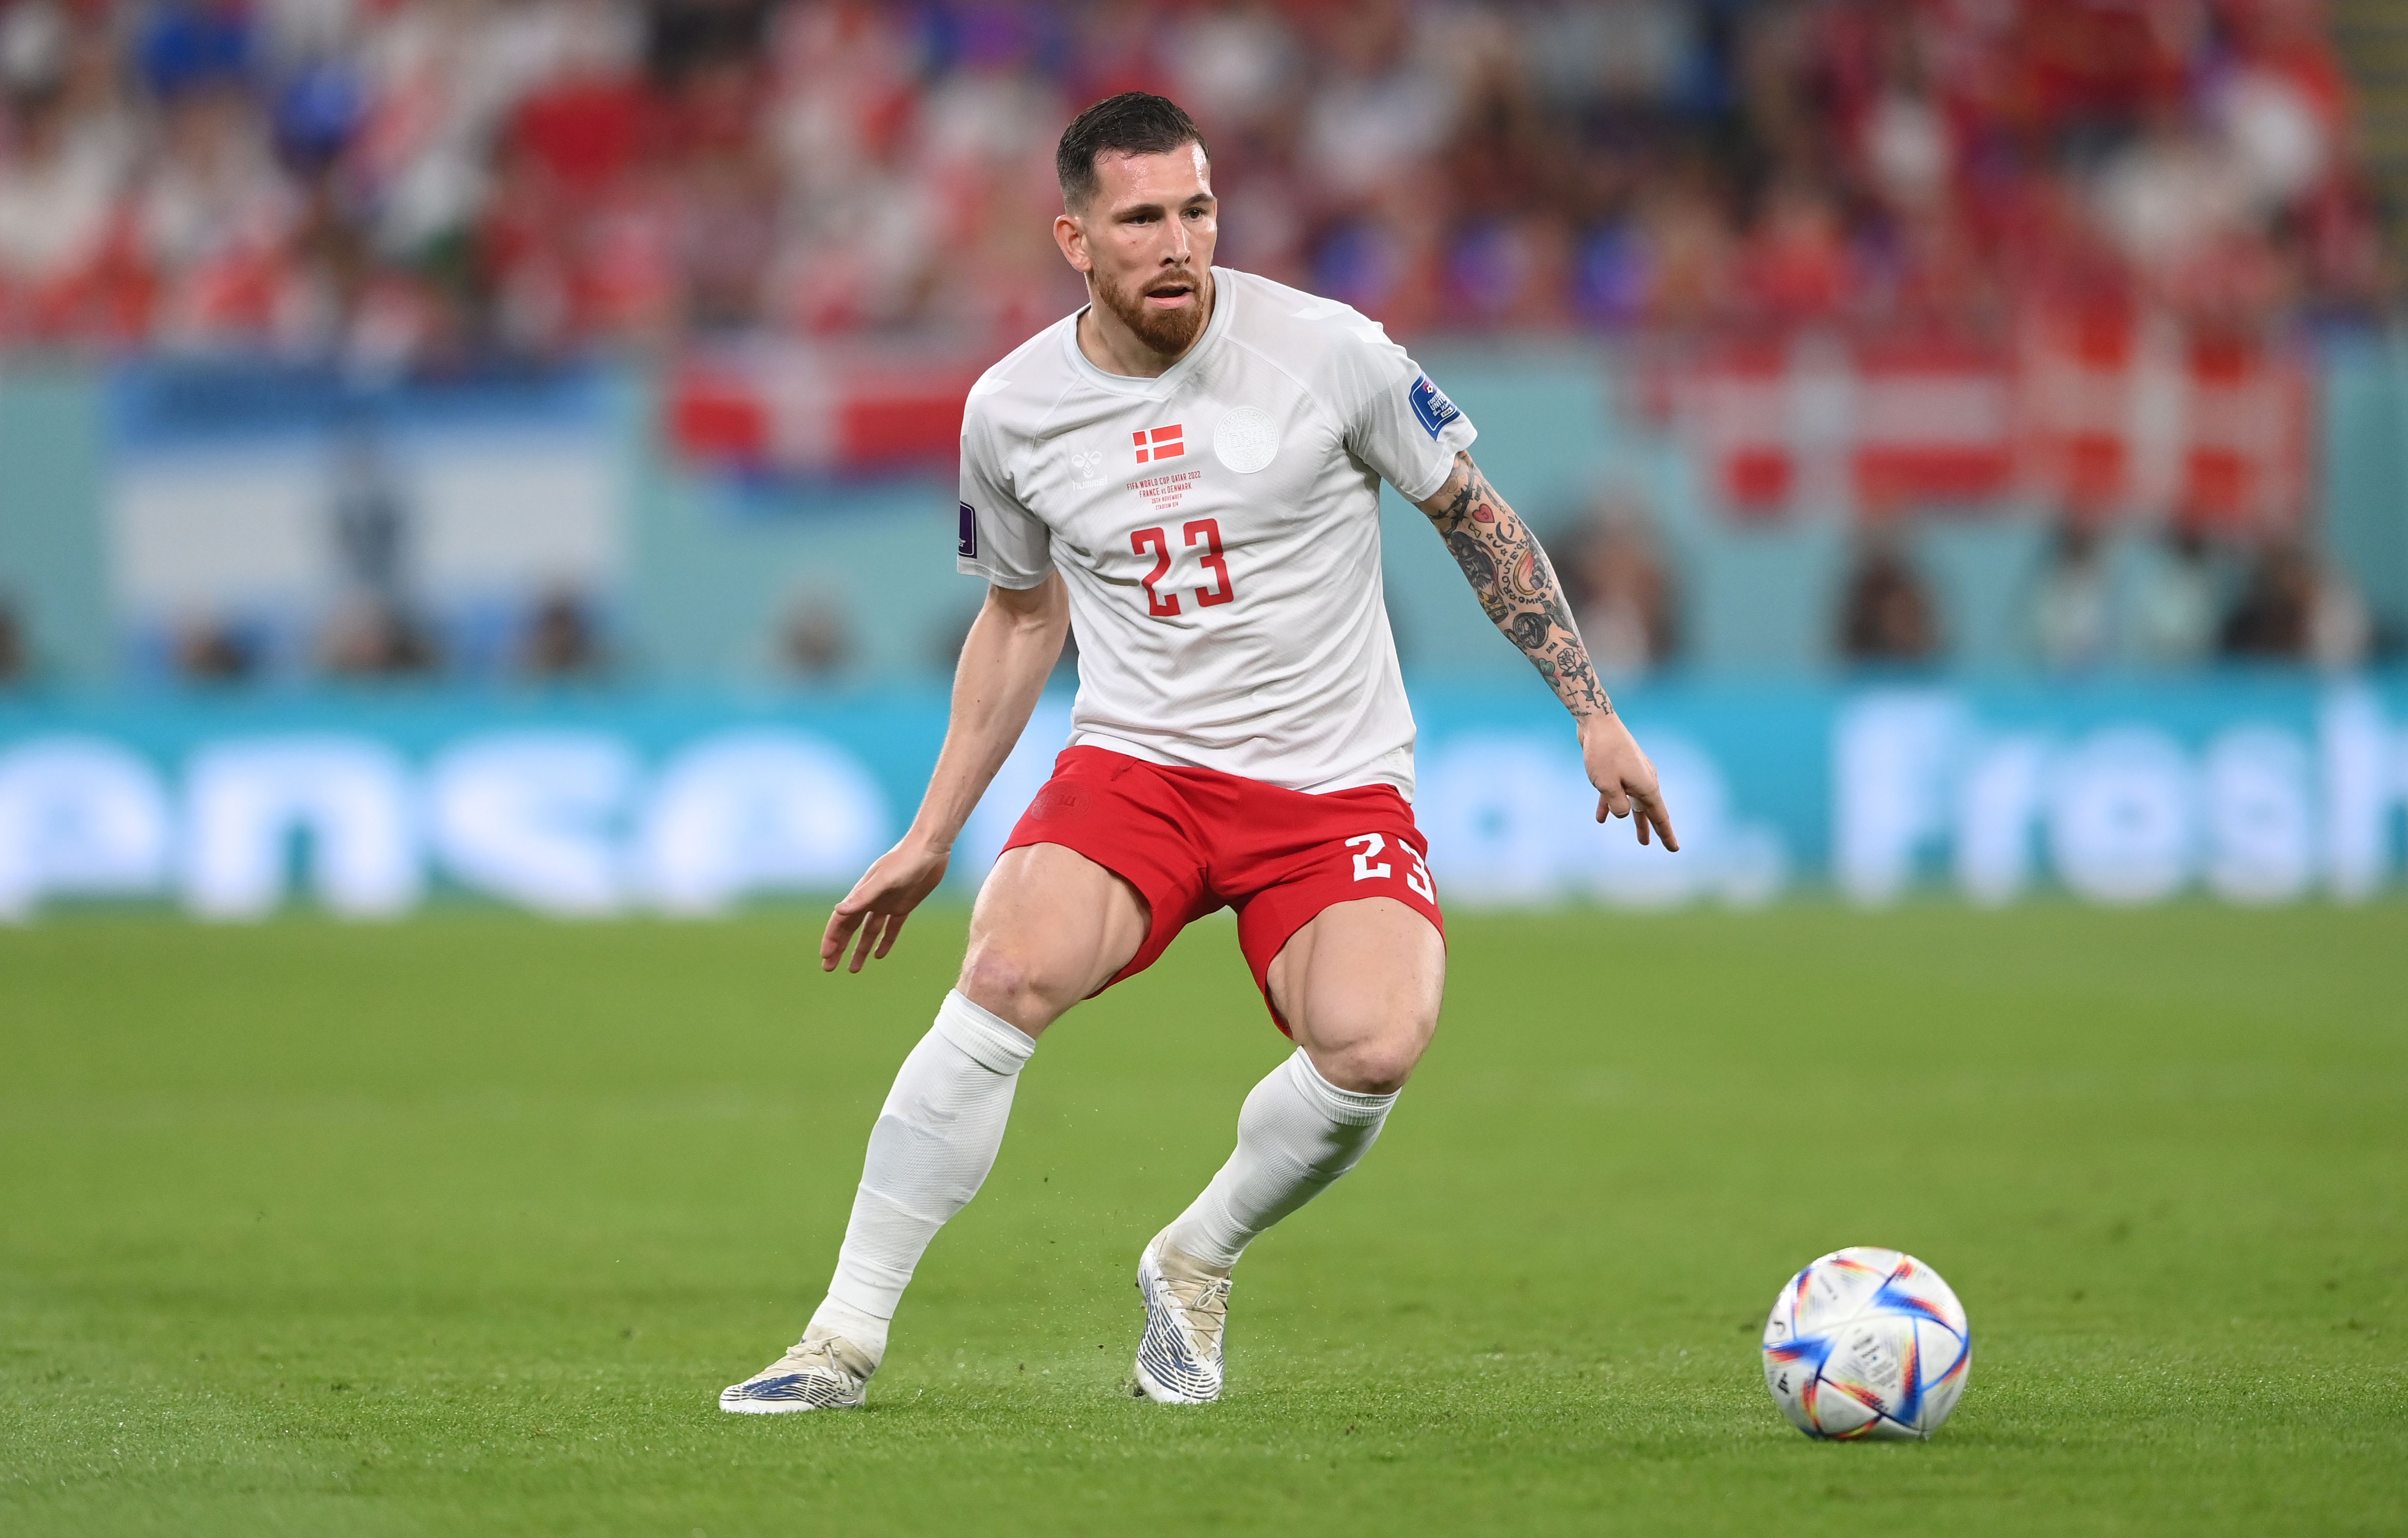 Denmark player Pierre-Emile Hojbjerg in action during the FIFA World Cup Qatar 2022 Group D match between France and Denmark at Stadium 974 on November 26, 2022 in Doha, Qatar.